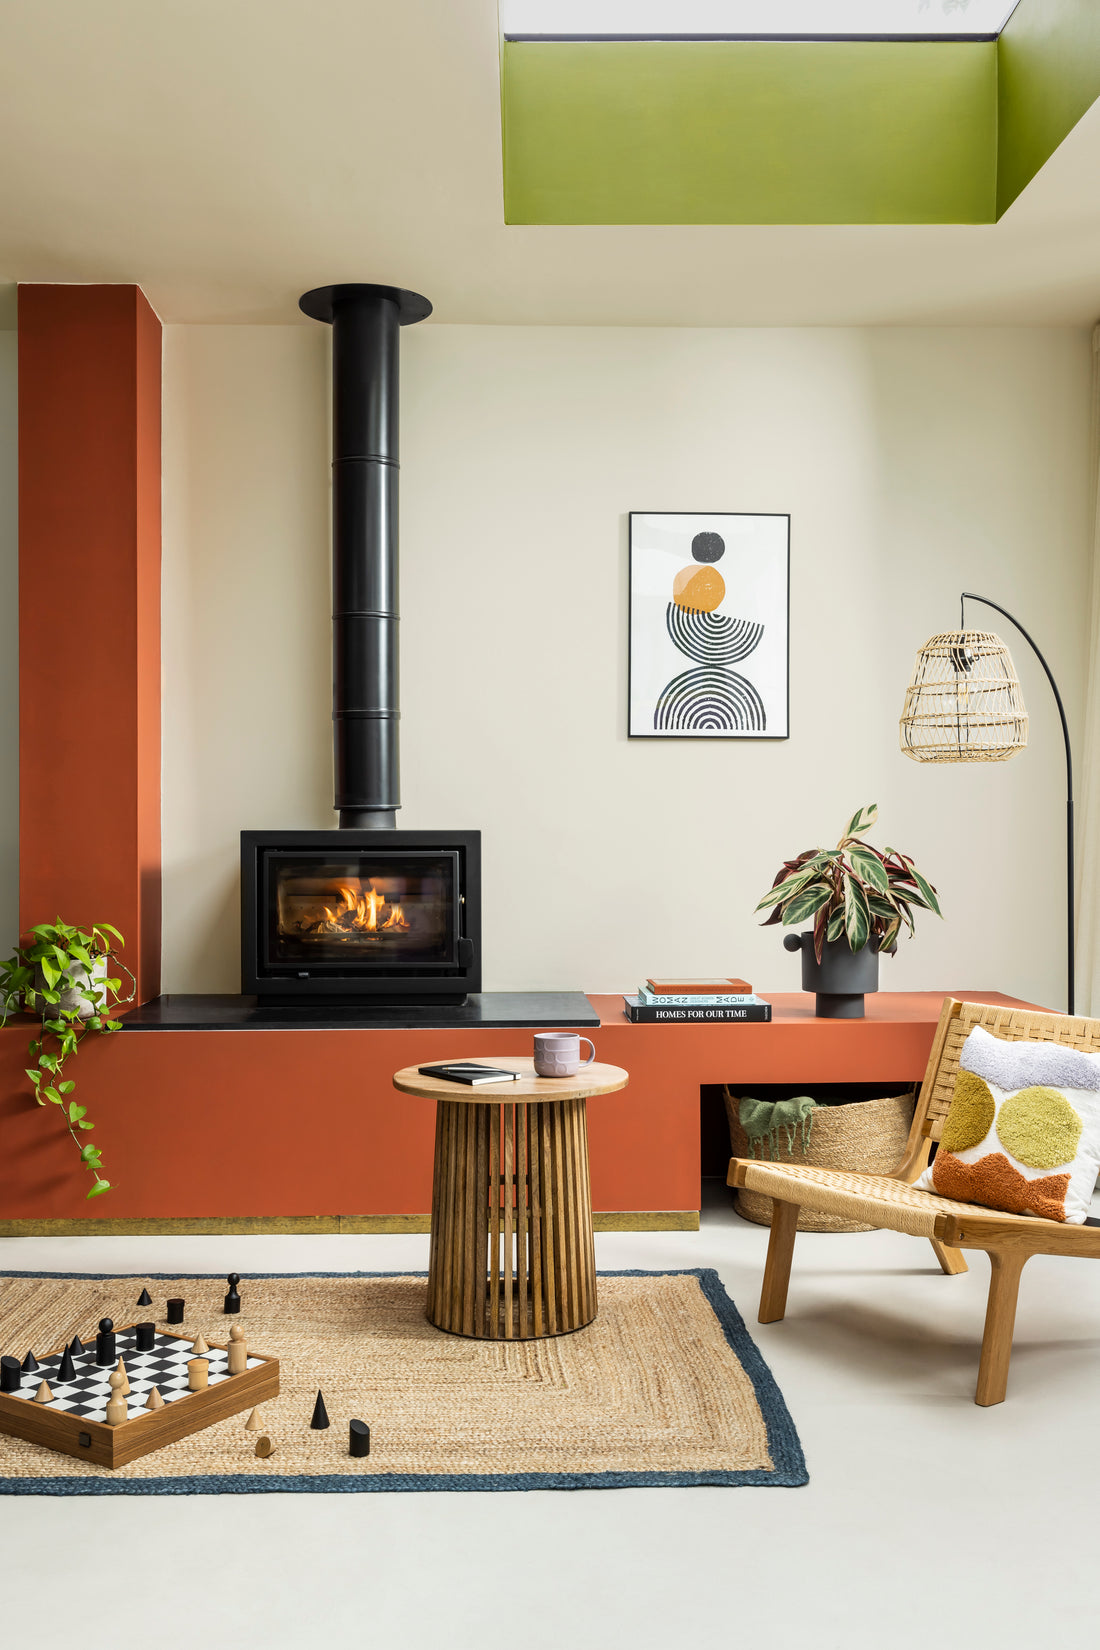 Home decor and interior colour schemes for 2023, inspired by cultural trends with Habitat